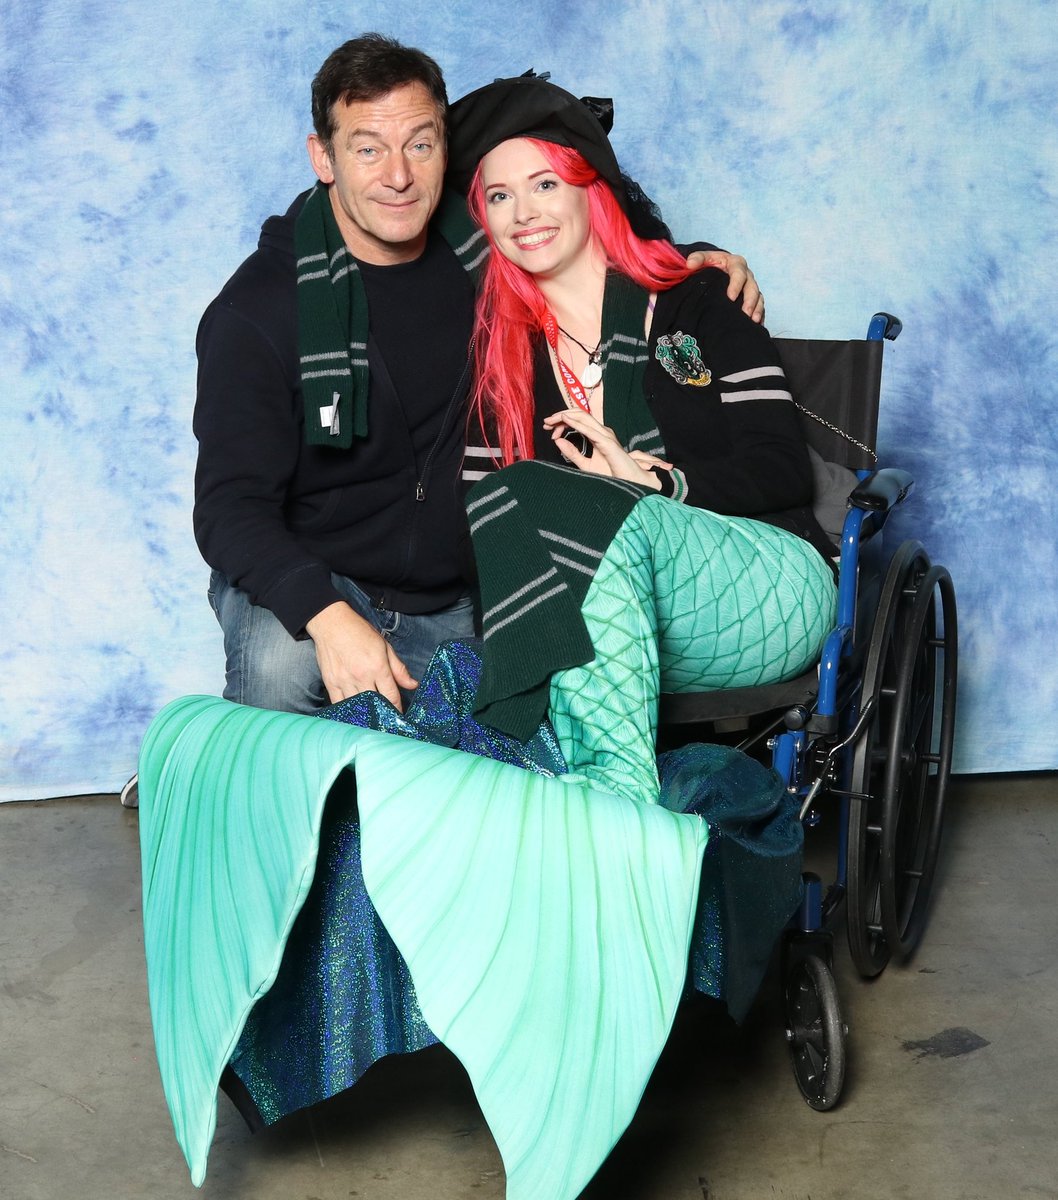 Met Jason Isaacs,  when he saw me he got excited and said wow! He's so nice! @jasonsfolly
#awesomecon #mermaid #mermaidlife #awesomecon2019  #cosplay #cosplaying #cosplayfun #cosplayworld  #cosplayoftheday #cosplaycommunity 
#harrypotter #jasonissacs #malfoy #slytherin #disabled